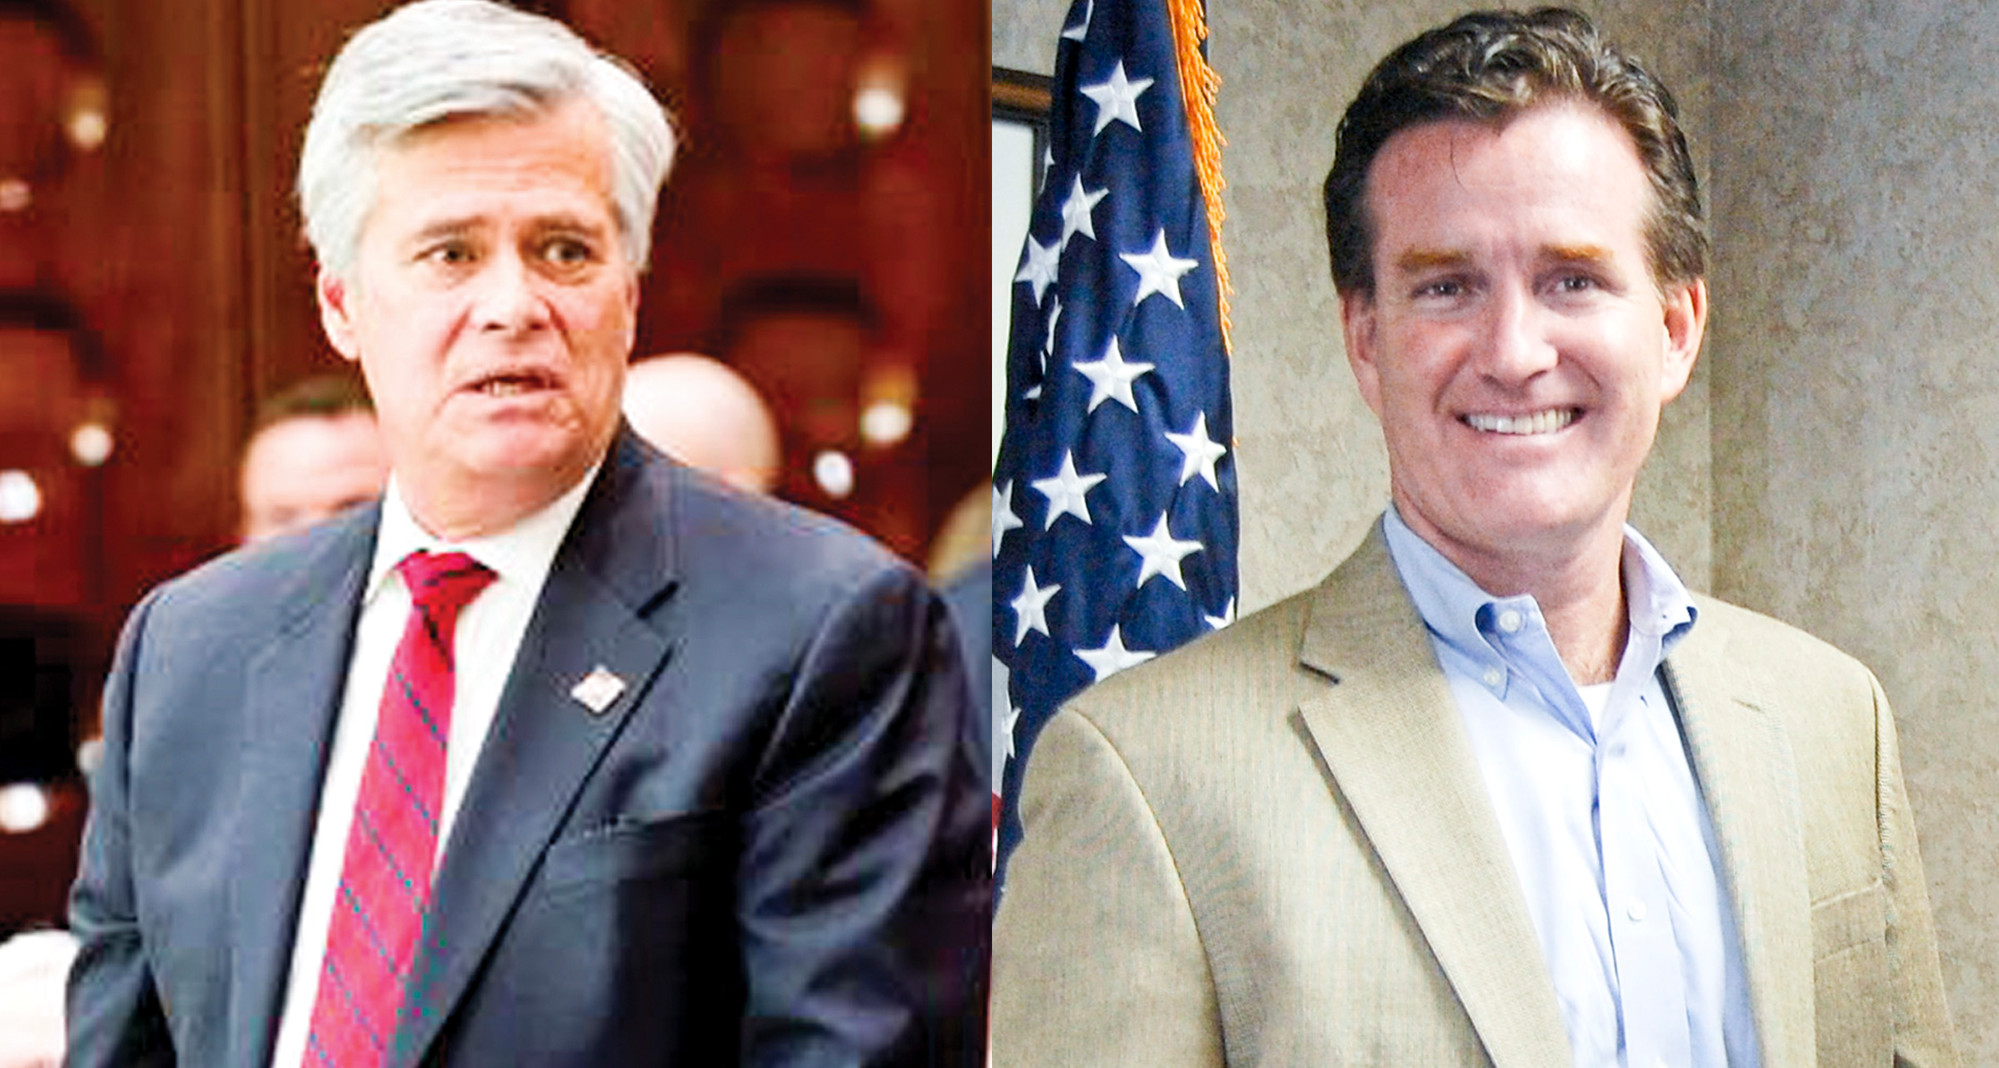 Dean Skelos, left, is said to be stepping down from his position as Majority Leader of the Senate. Reports say that John Flanagan, a Republican from East Northport, will be replacing him.